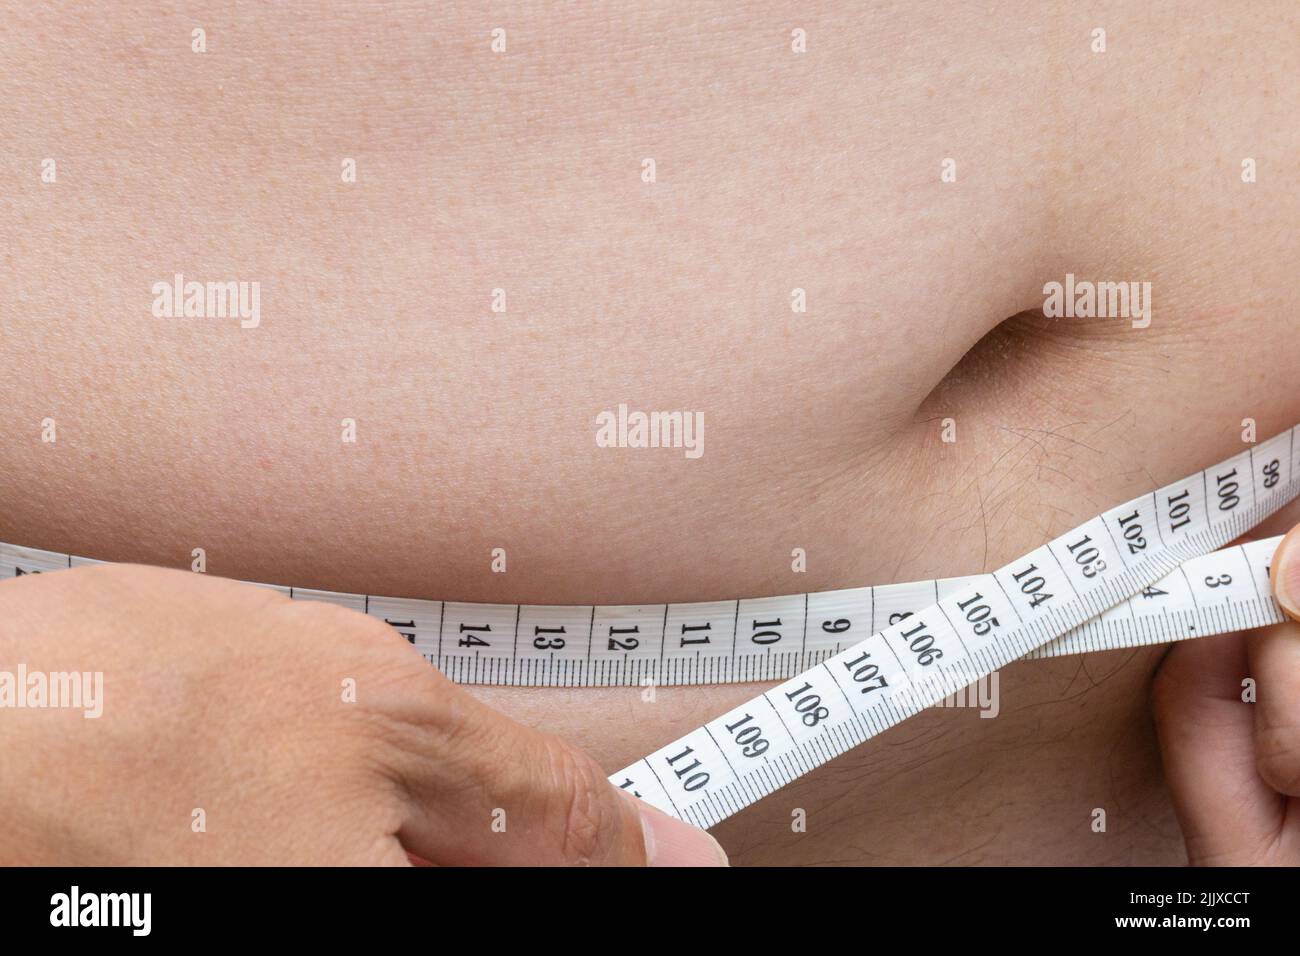 Tape measure to measure various body parts Stock Photo